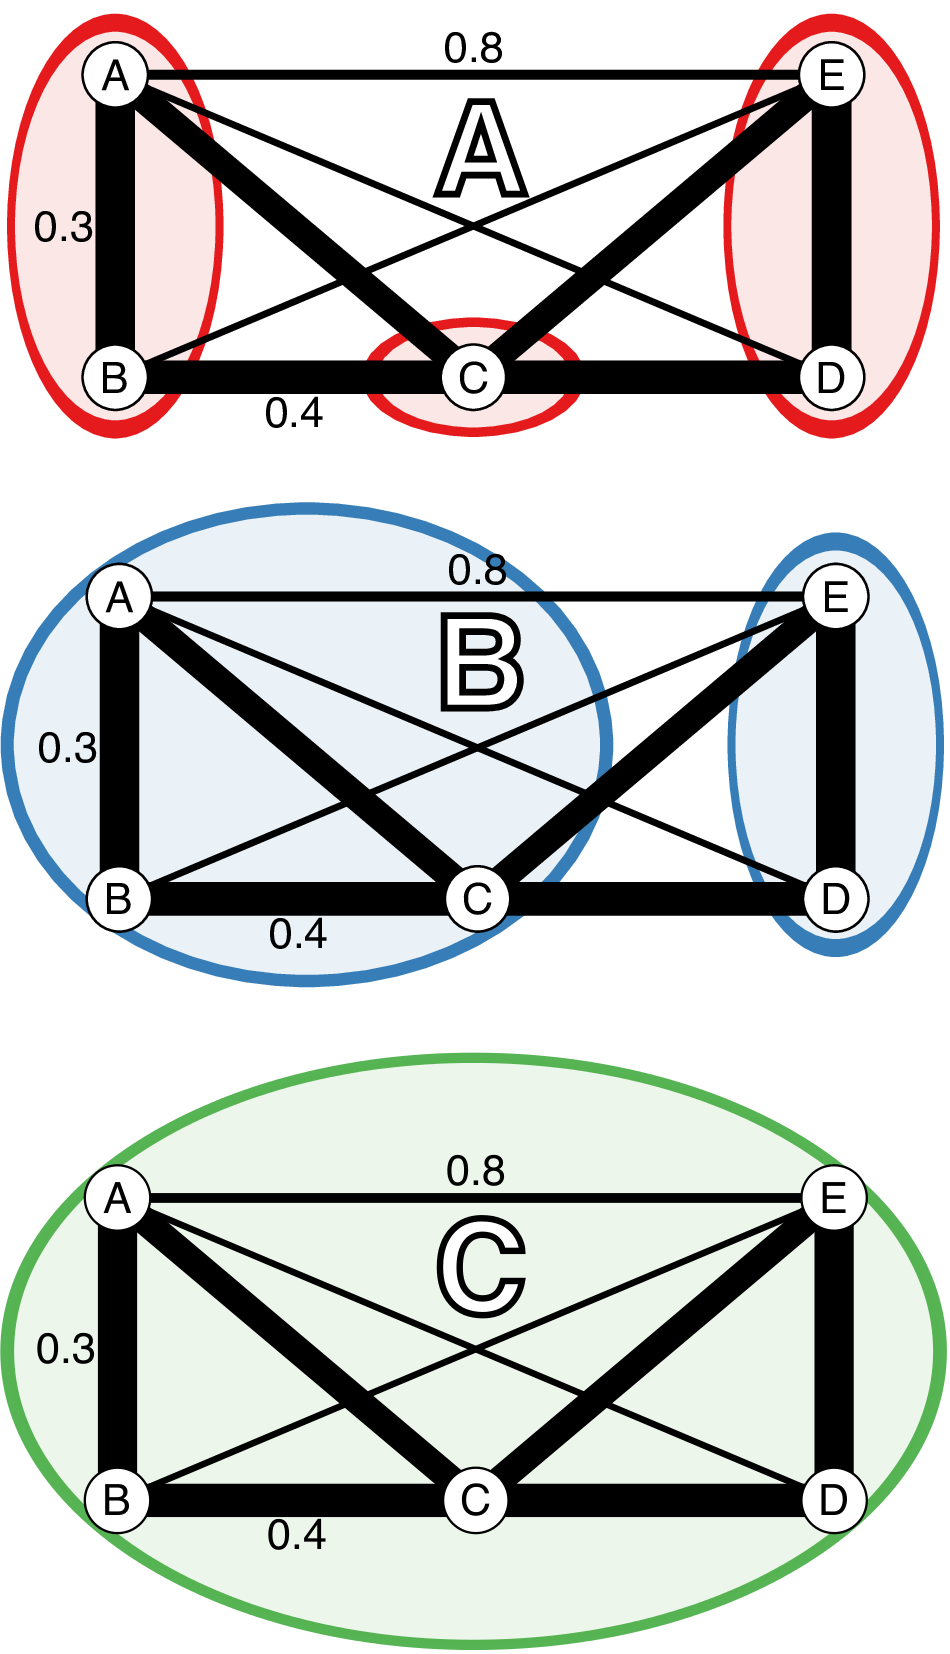 Diagrammatic representation of the three clustering algorithms
implemented in `mlg.filter`. (**A-C**) Represent different clustering
algorithms on the same imaginary network with a threshold of 0.451. Edge
weights are represented in arbitrary units noted by the line thickness
and numerical values next to the lines. All outer angles are 90 degrees,
so the un-labeled edge weights can be obtained with simply geometry.
Colored circles represent clusters of genotypes. (**A**) Farthest
neighbor clustering does not cluster nodes B and C because nodes A and C
are more than a distance of 0.451 apart. (**B**) UPGMA (average
neighbor) clustering clusters nodes A, B, and C together because the
average distance between them and C is &lt; 0.451. (**C**) Nearest
neighbor clustering clusters all nodes together because the minimum
distance between them is always &lt; 0.451.